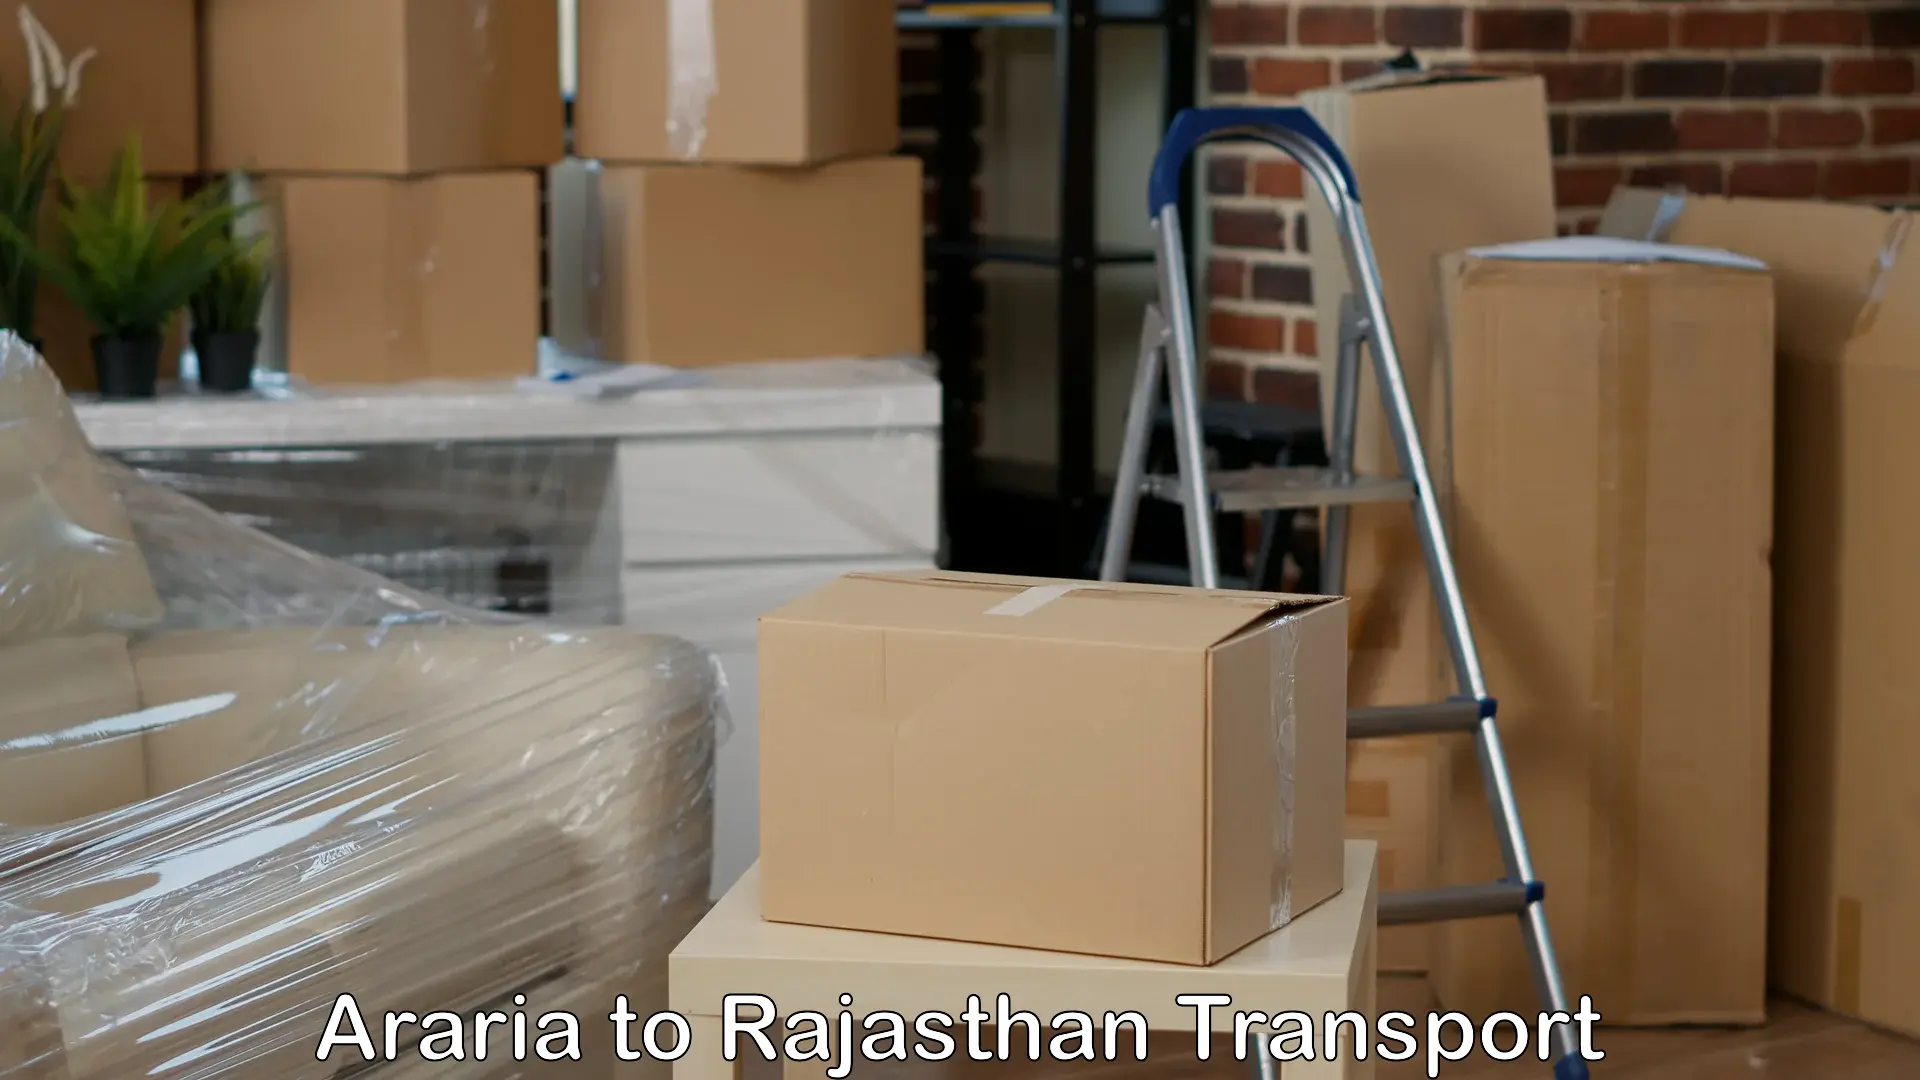 Truck transport companies in India Araria to Kaman